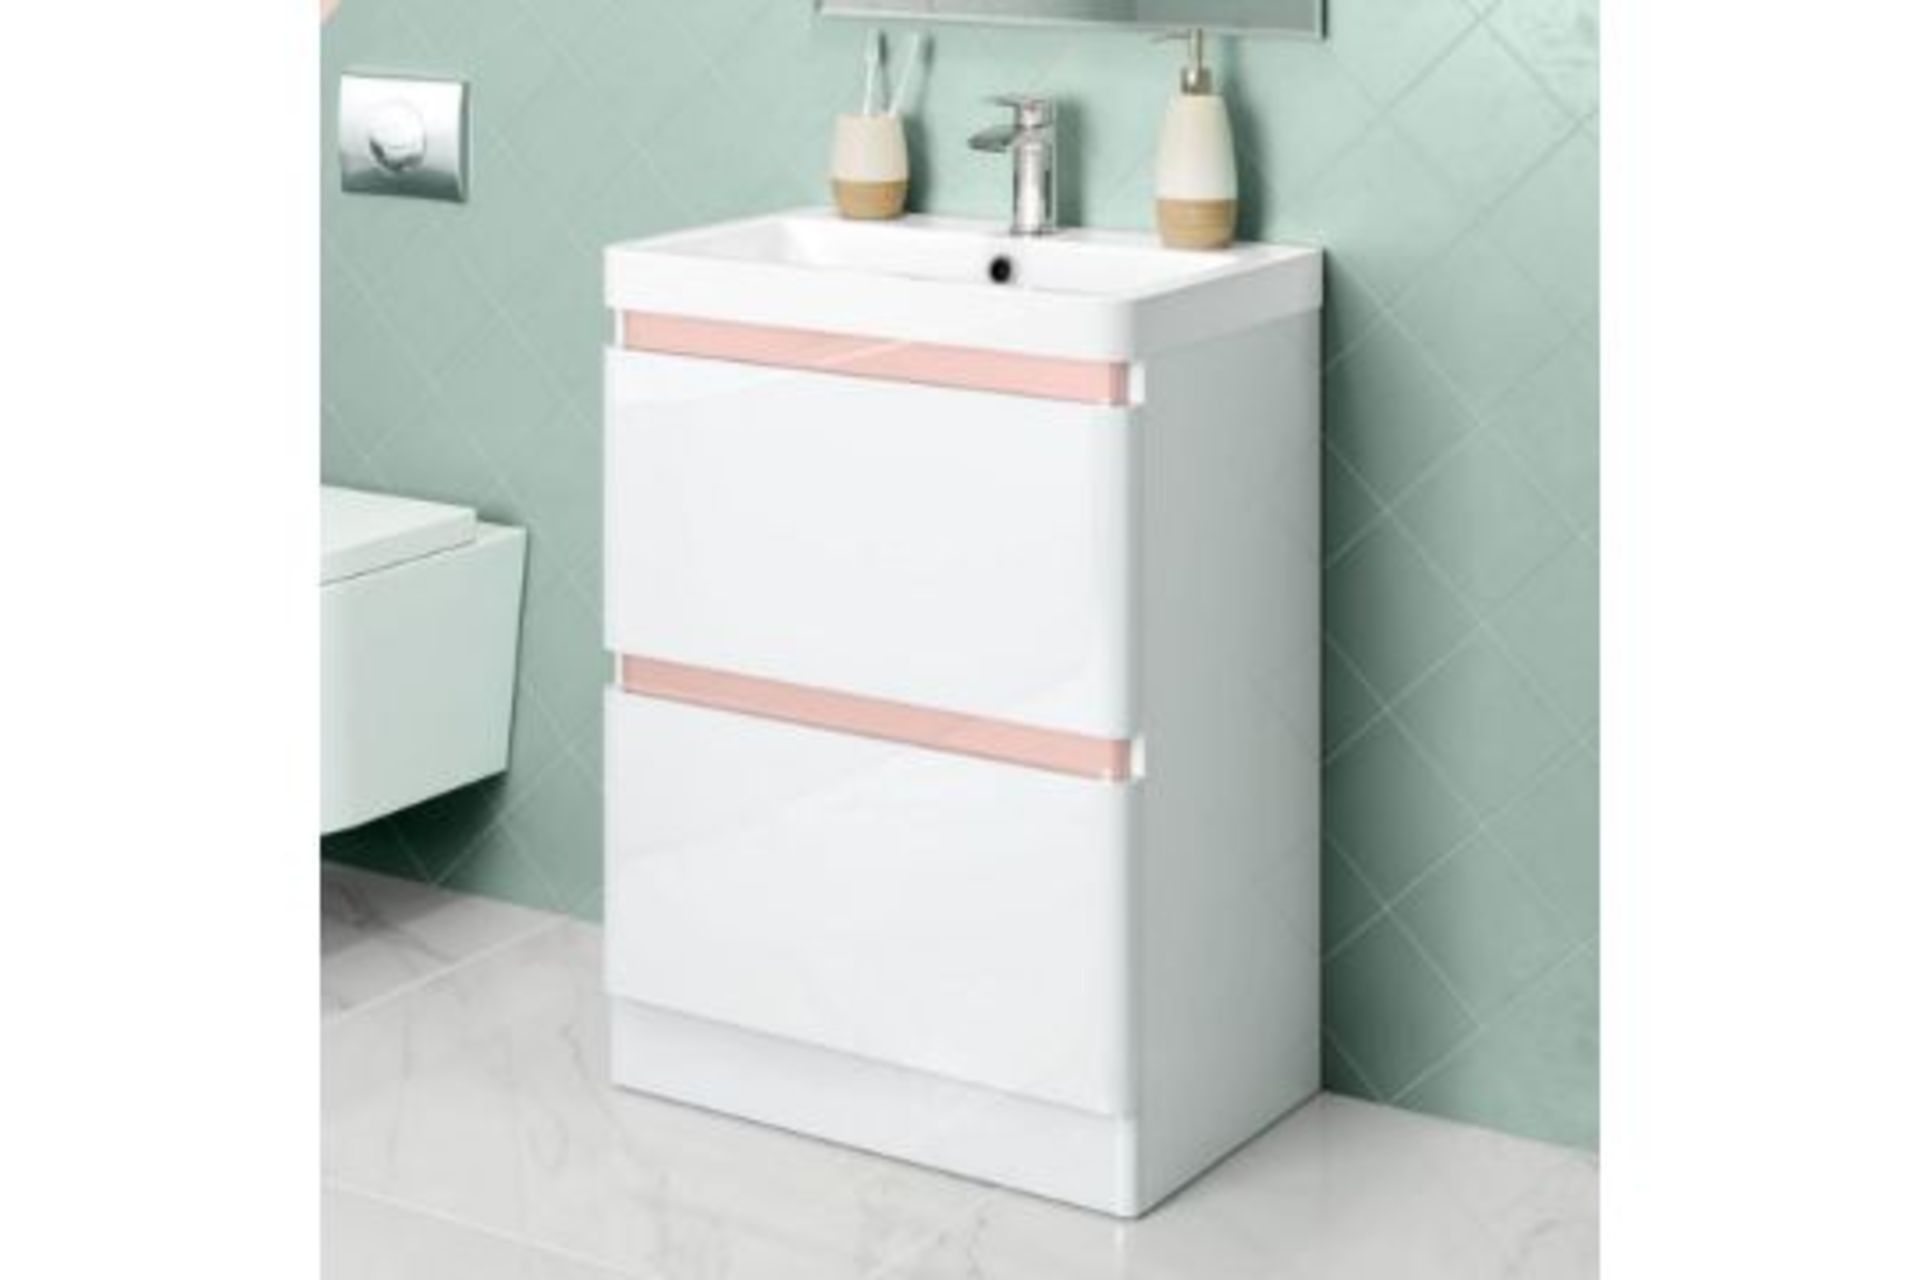 New & Boxed 600mm Denver Floor Standing Vanity Unit - Rose Gold Edition. (ROW15TOP) RRP £499.99.